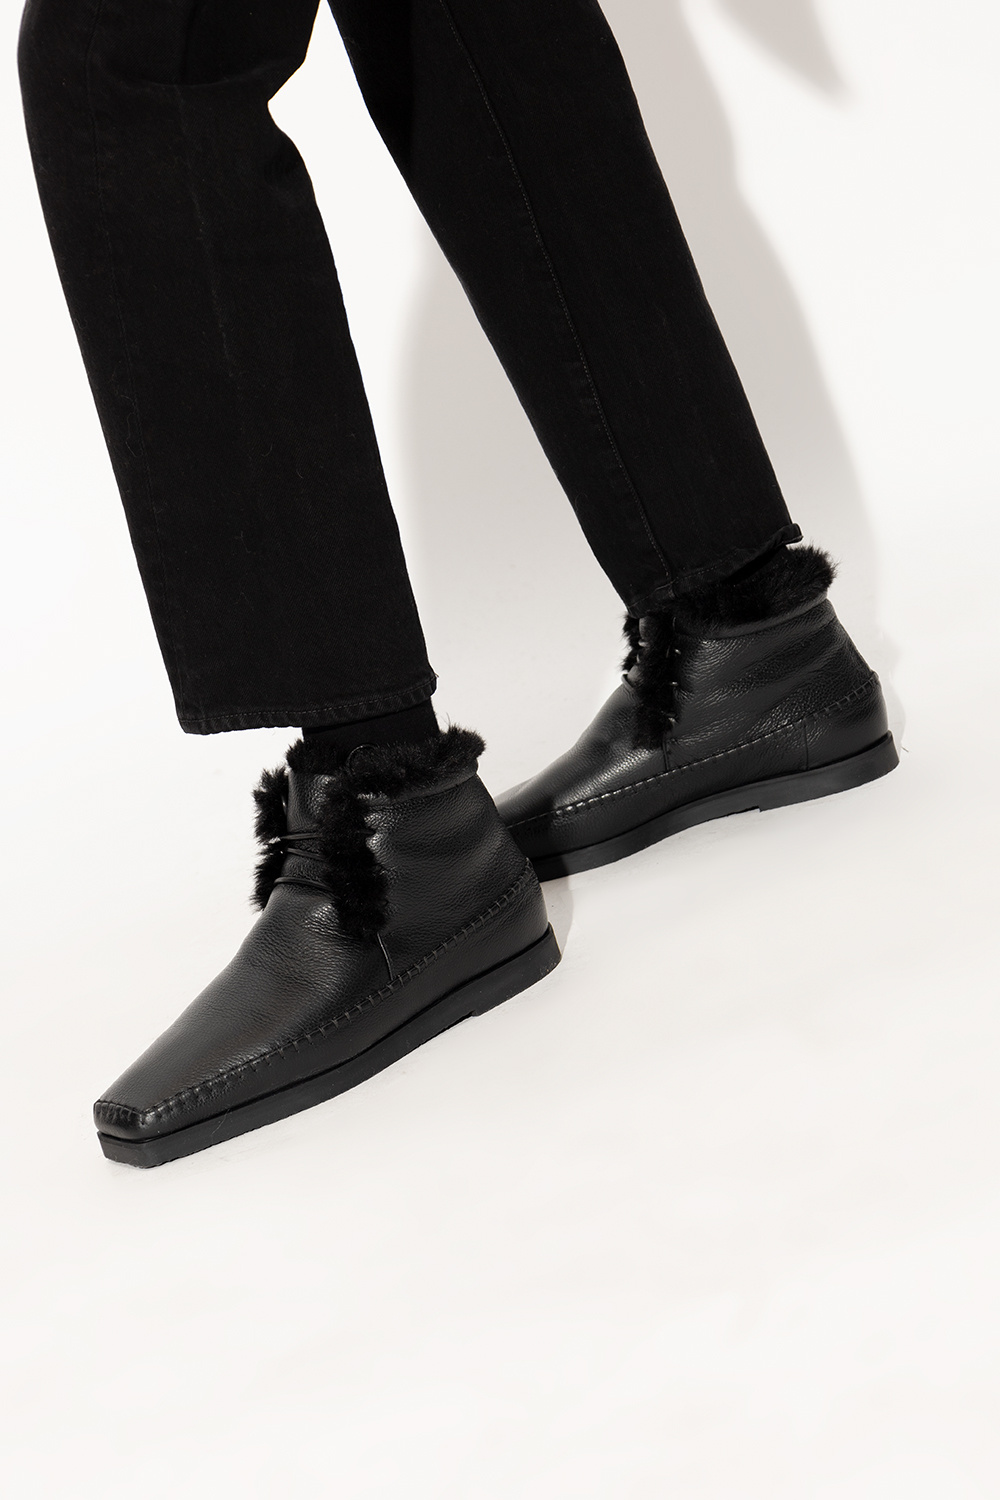 TOTEME Leather ankle boots